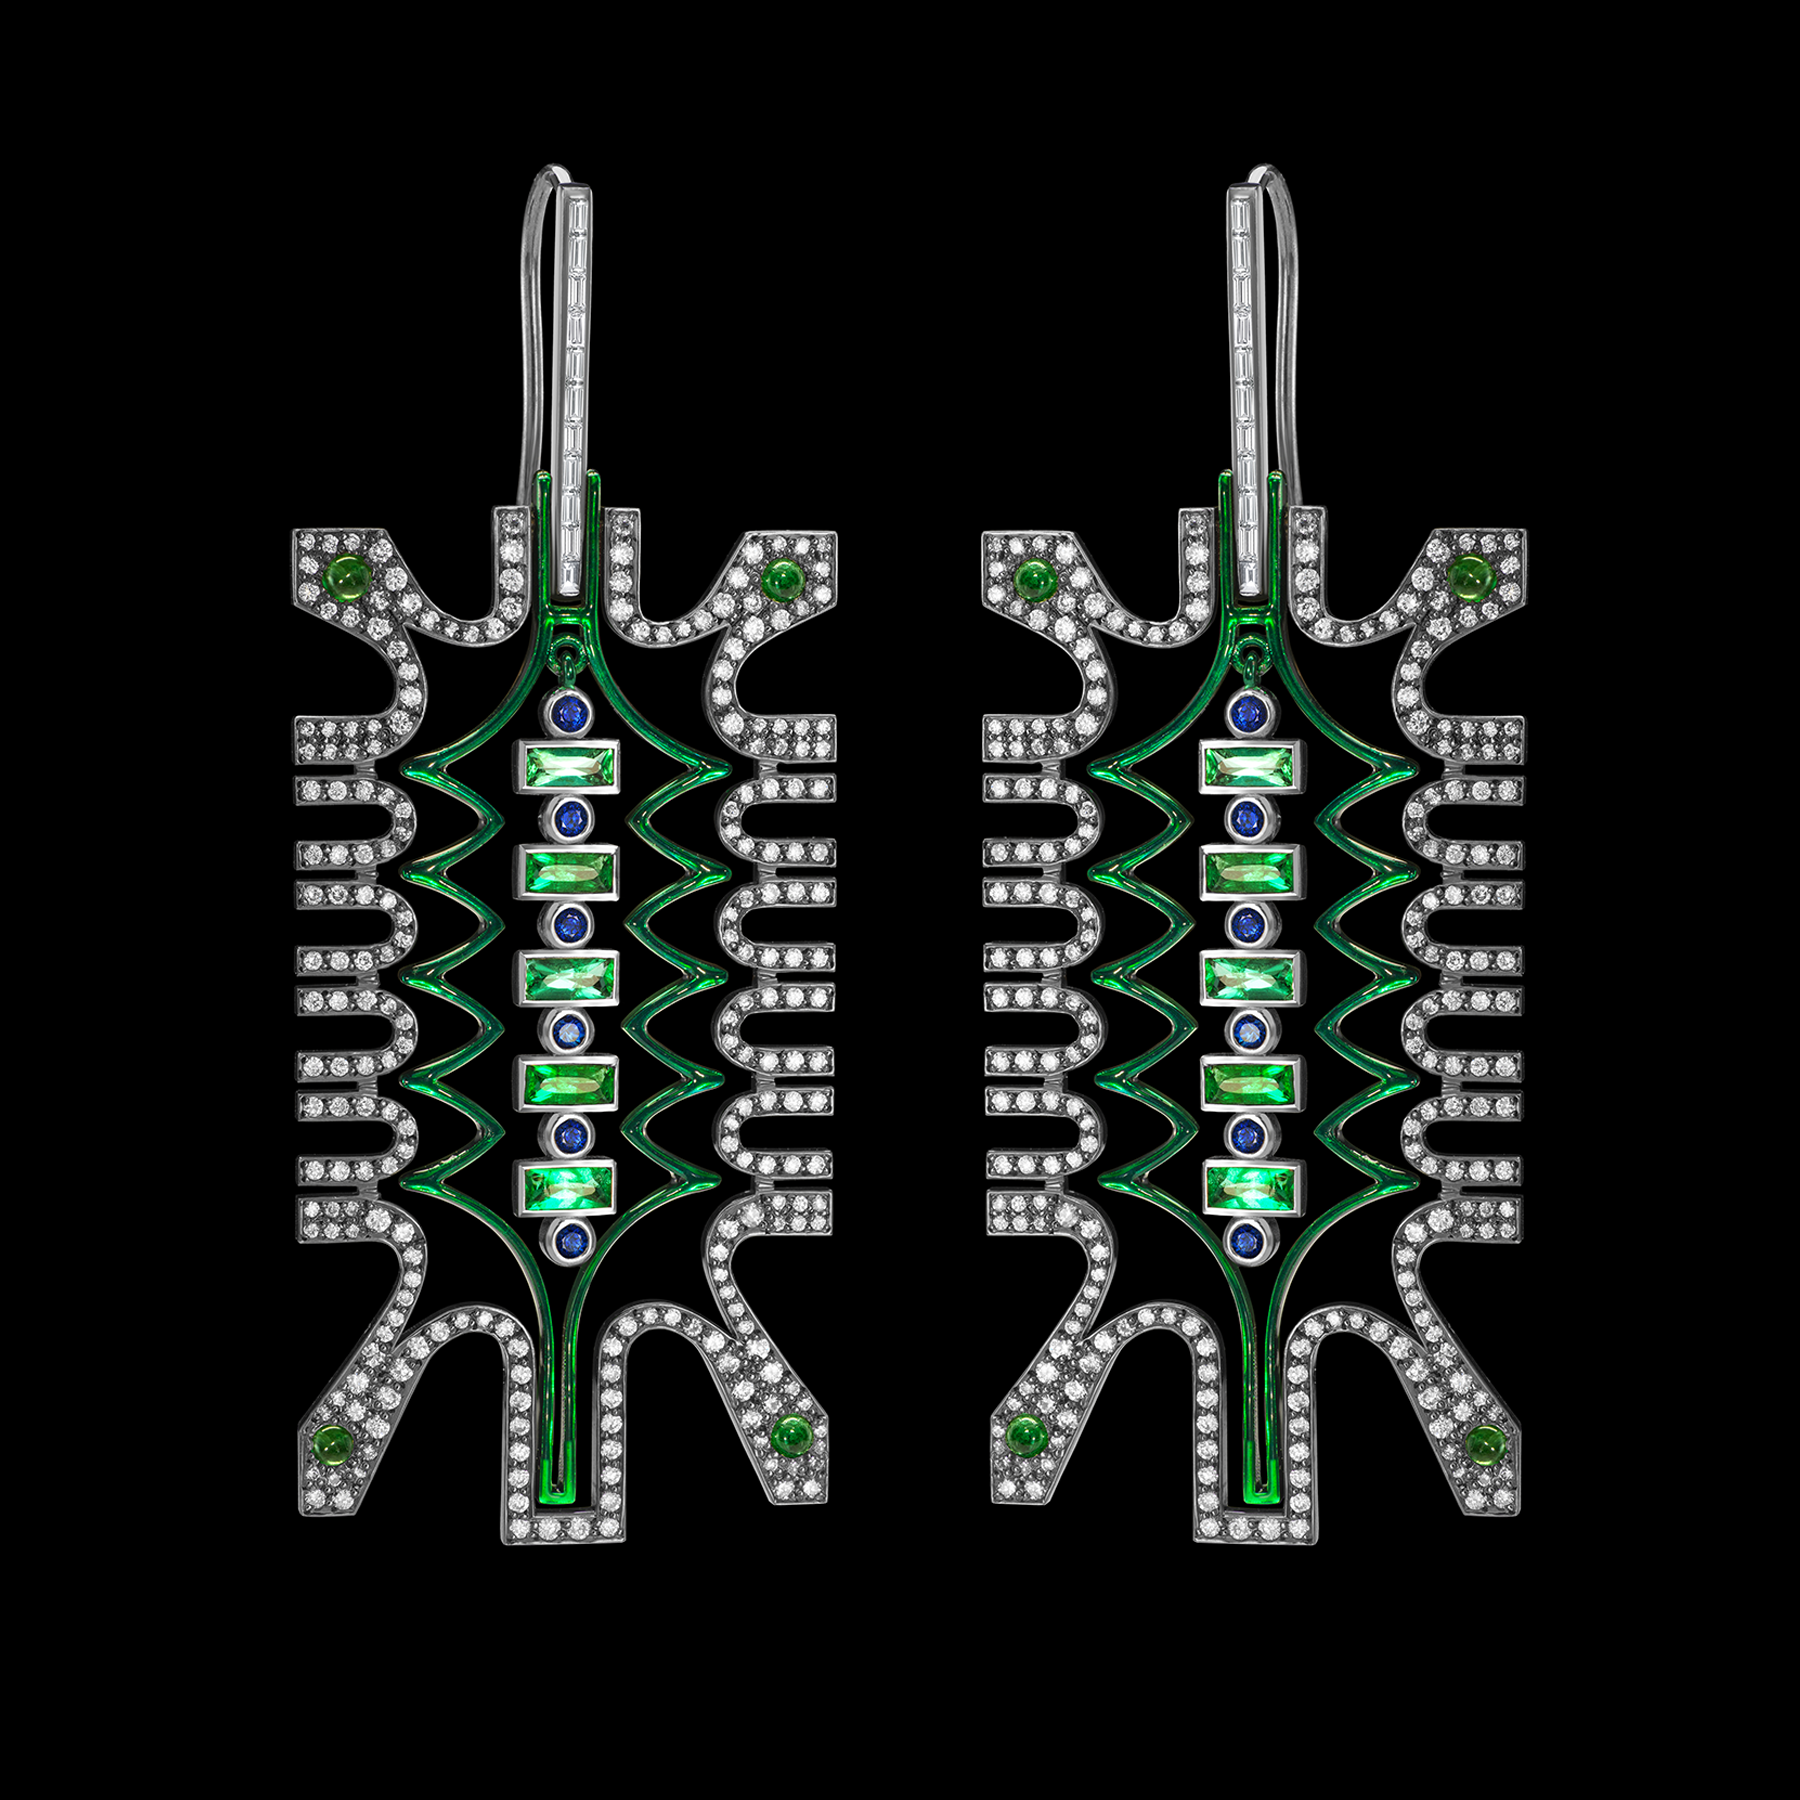 The Sistine Earrings by designer Solange Azagury-Partridge - 18 carat Blackened White Gold and 18 carat Blackened Yellow Gold, emerald, sapphire, diamond, green ceramic and enamel - front view